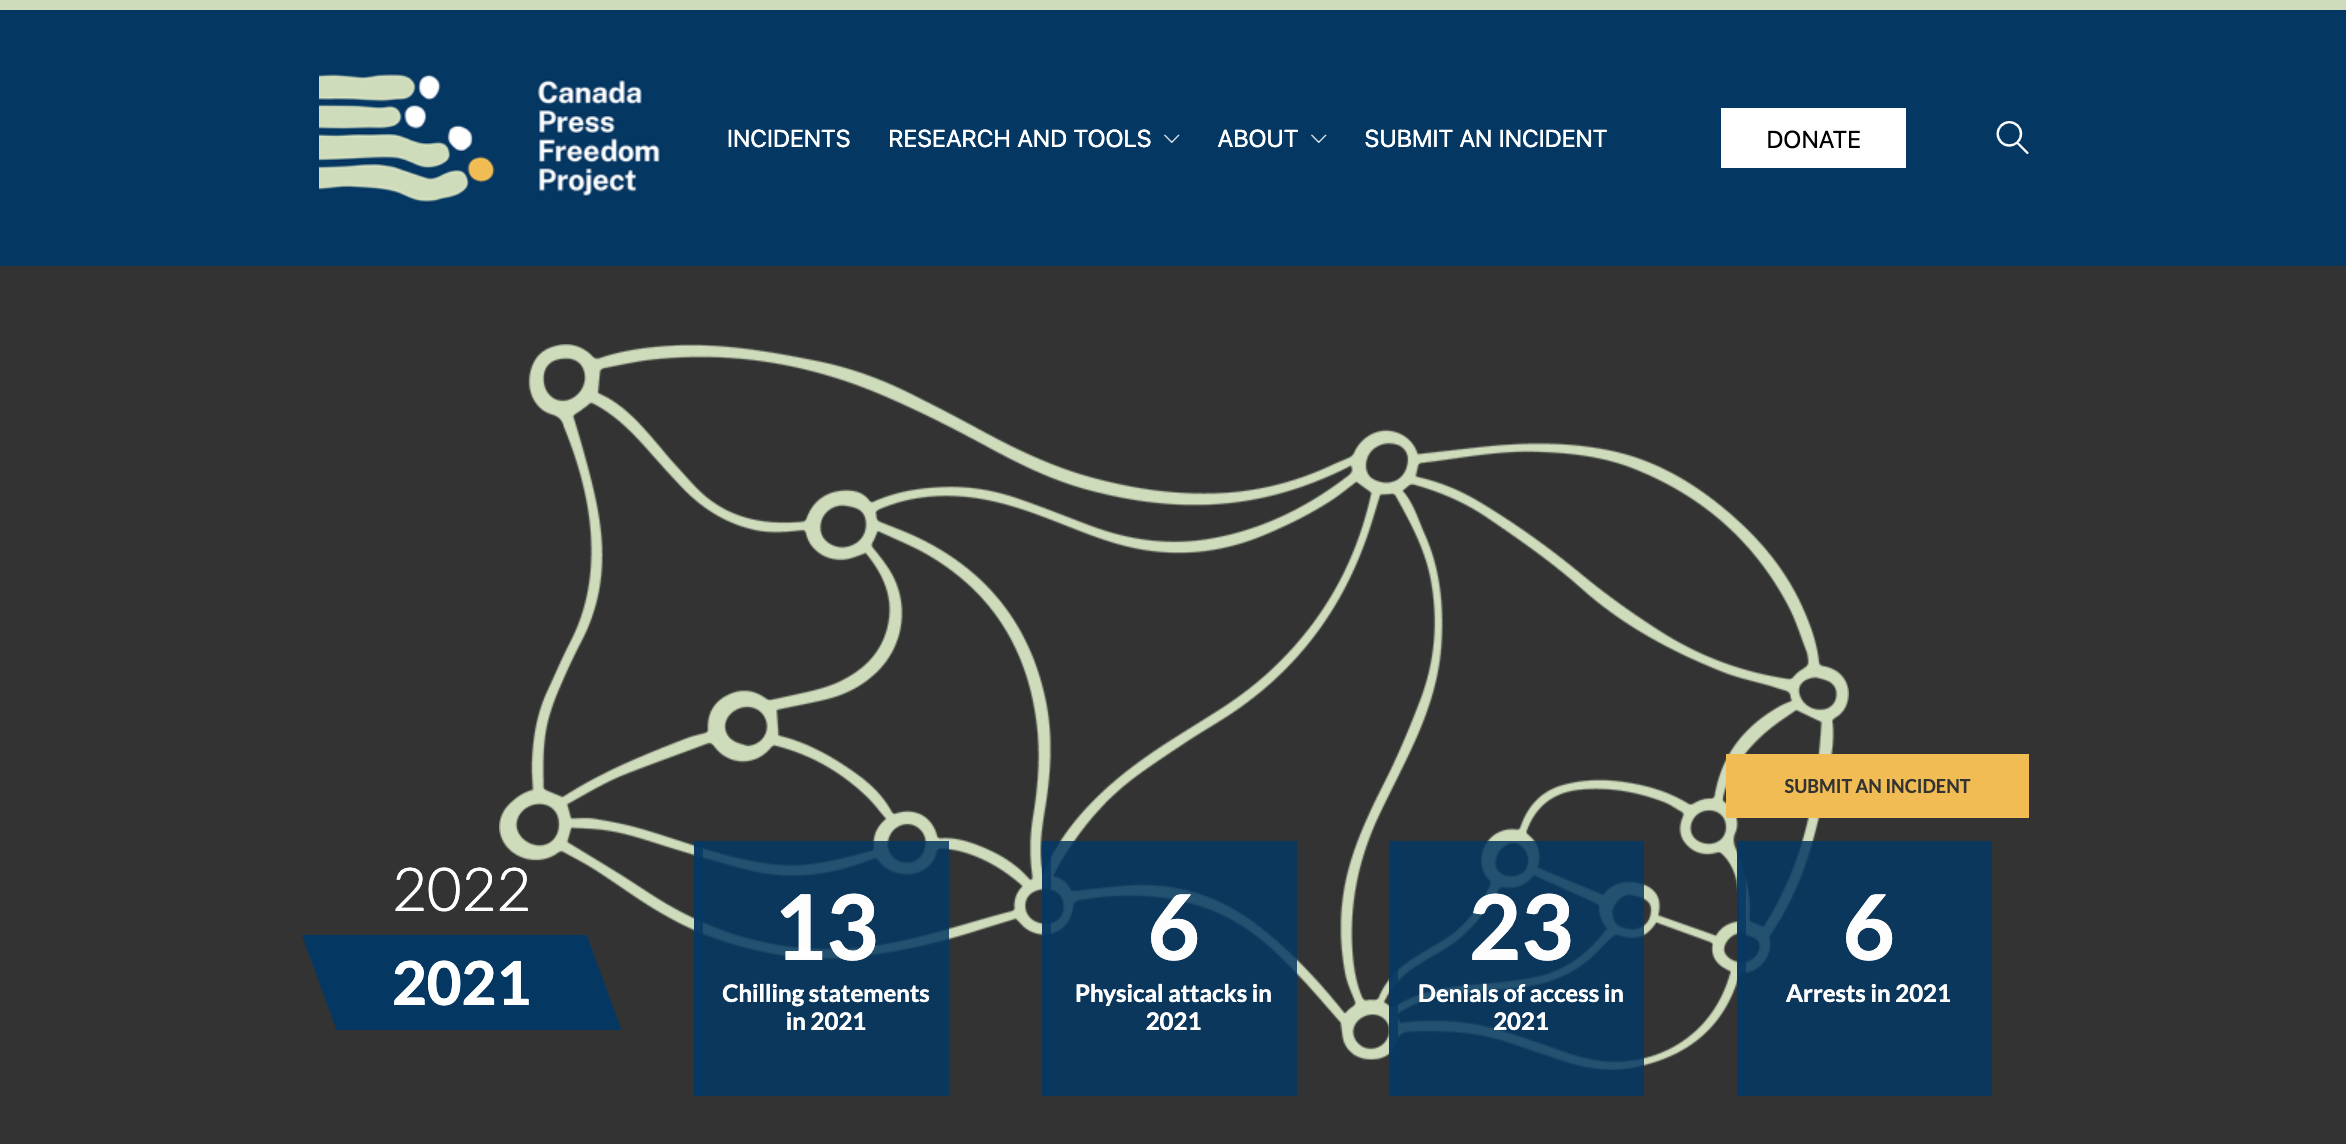 Canada Press Freedom Project homepage counter shows in 2021, 13 chilling statements, 6 physical attacks, 23 denials of access and 6 arrests.